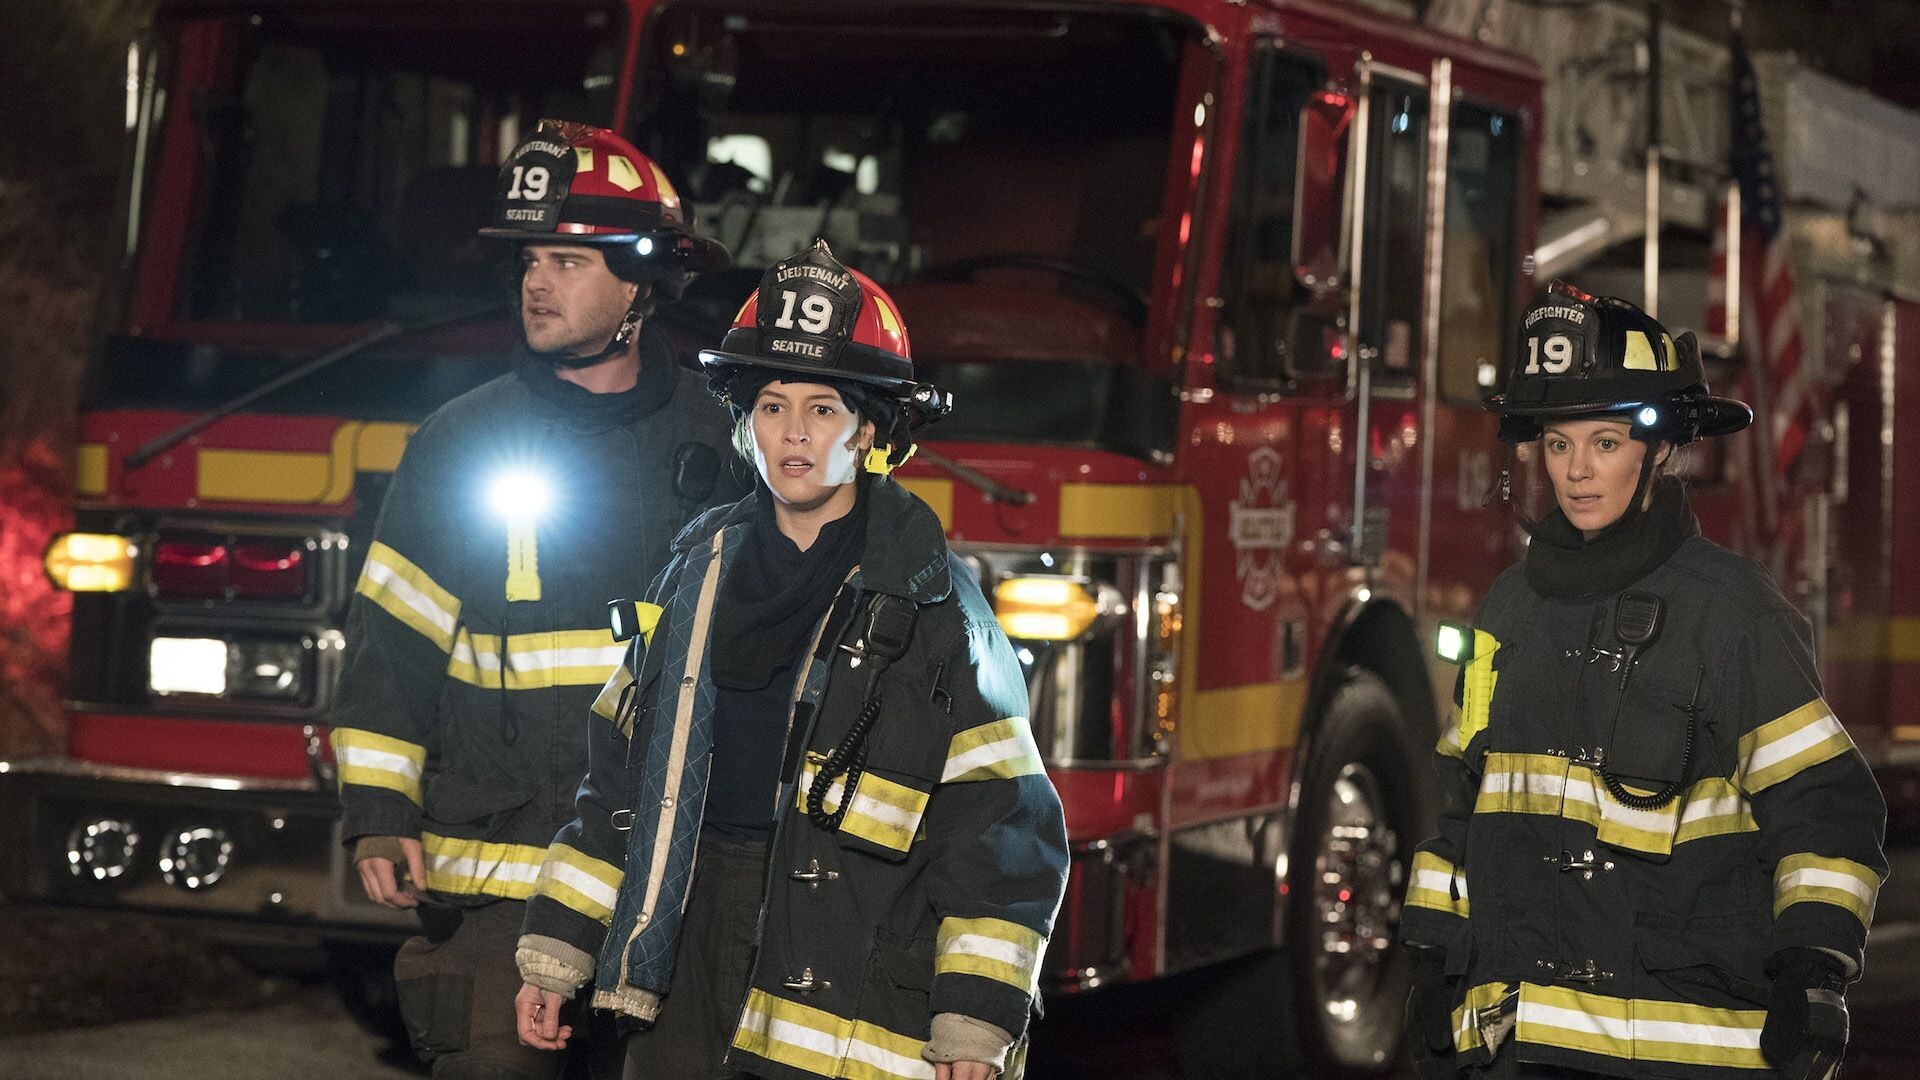 Station 19 (TV Series): The First Trailer For The "Grey's Anatomy" Spin-Off, Action, Drama, Romance. 1920x1080 Full HD Background.